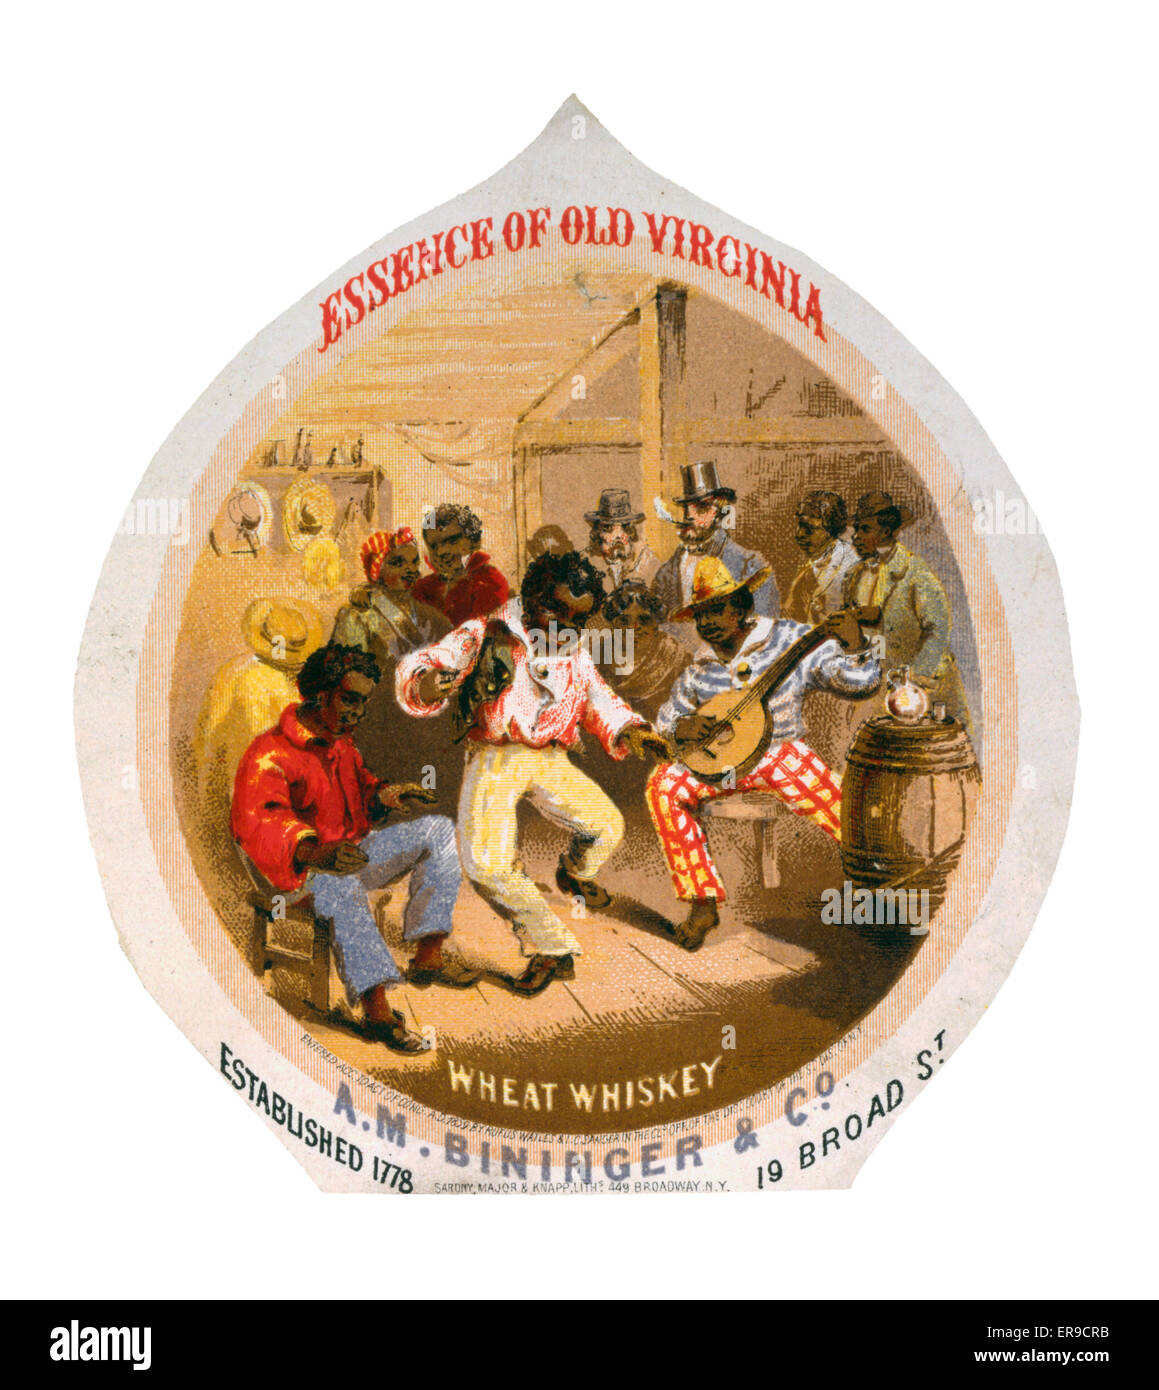 Essence of Old Virginia Wheat Whiskey, AM Bininger &amp; Co. Whiskey advertising label showing African Americans in tavern dancing. Date c1859. Essence of Old Virginia Wheat Whiskey, AM Bininger &amp; Co. Whiskey advertising label showing African American Stock Photo